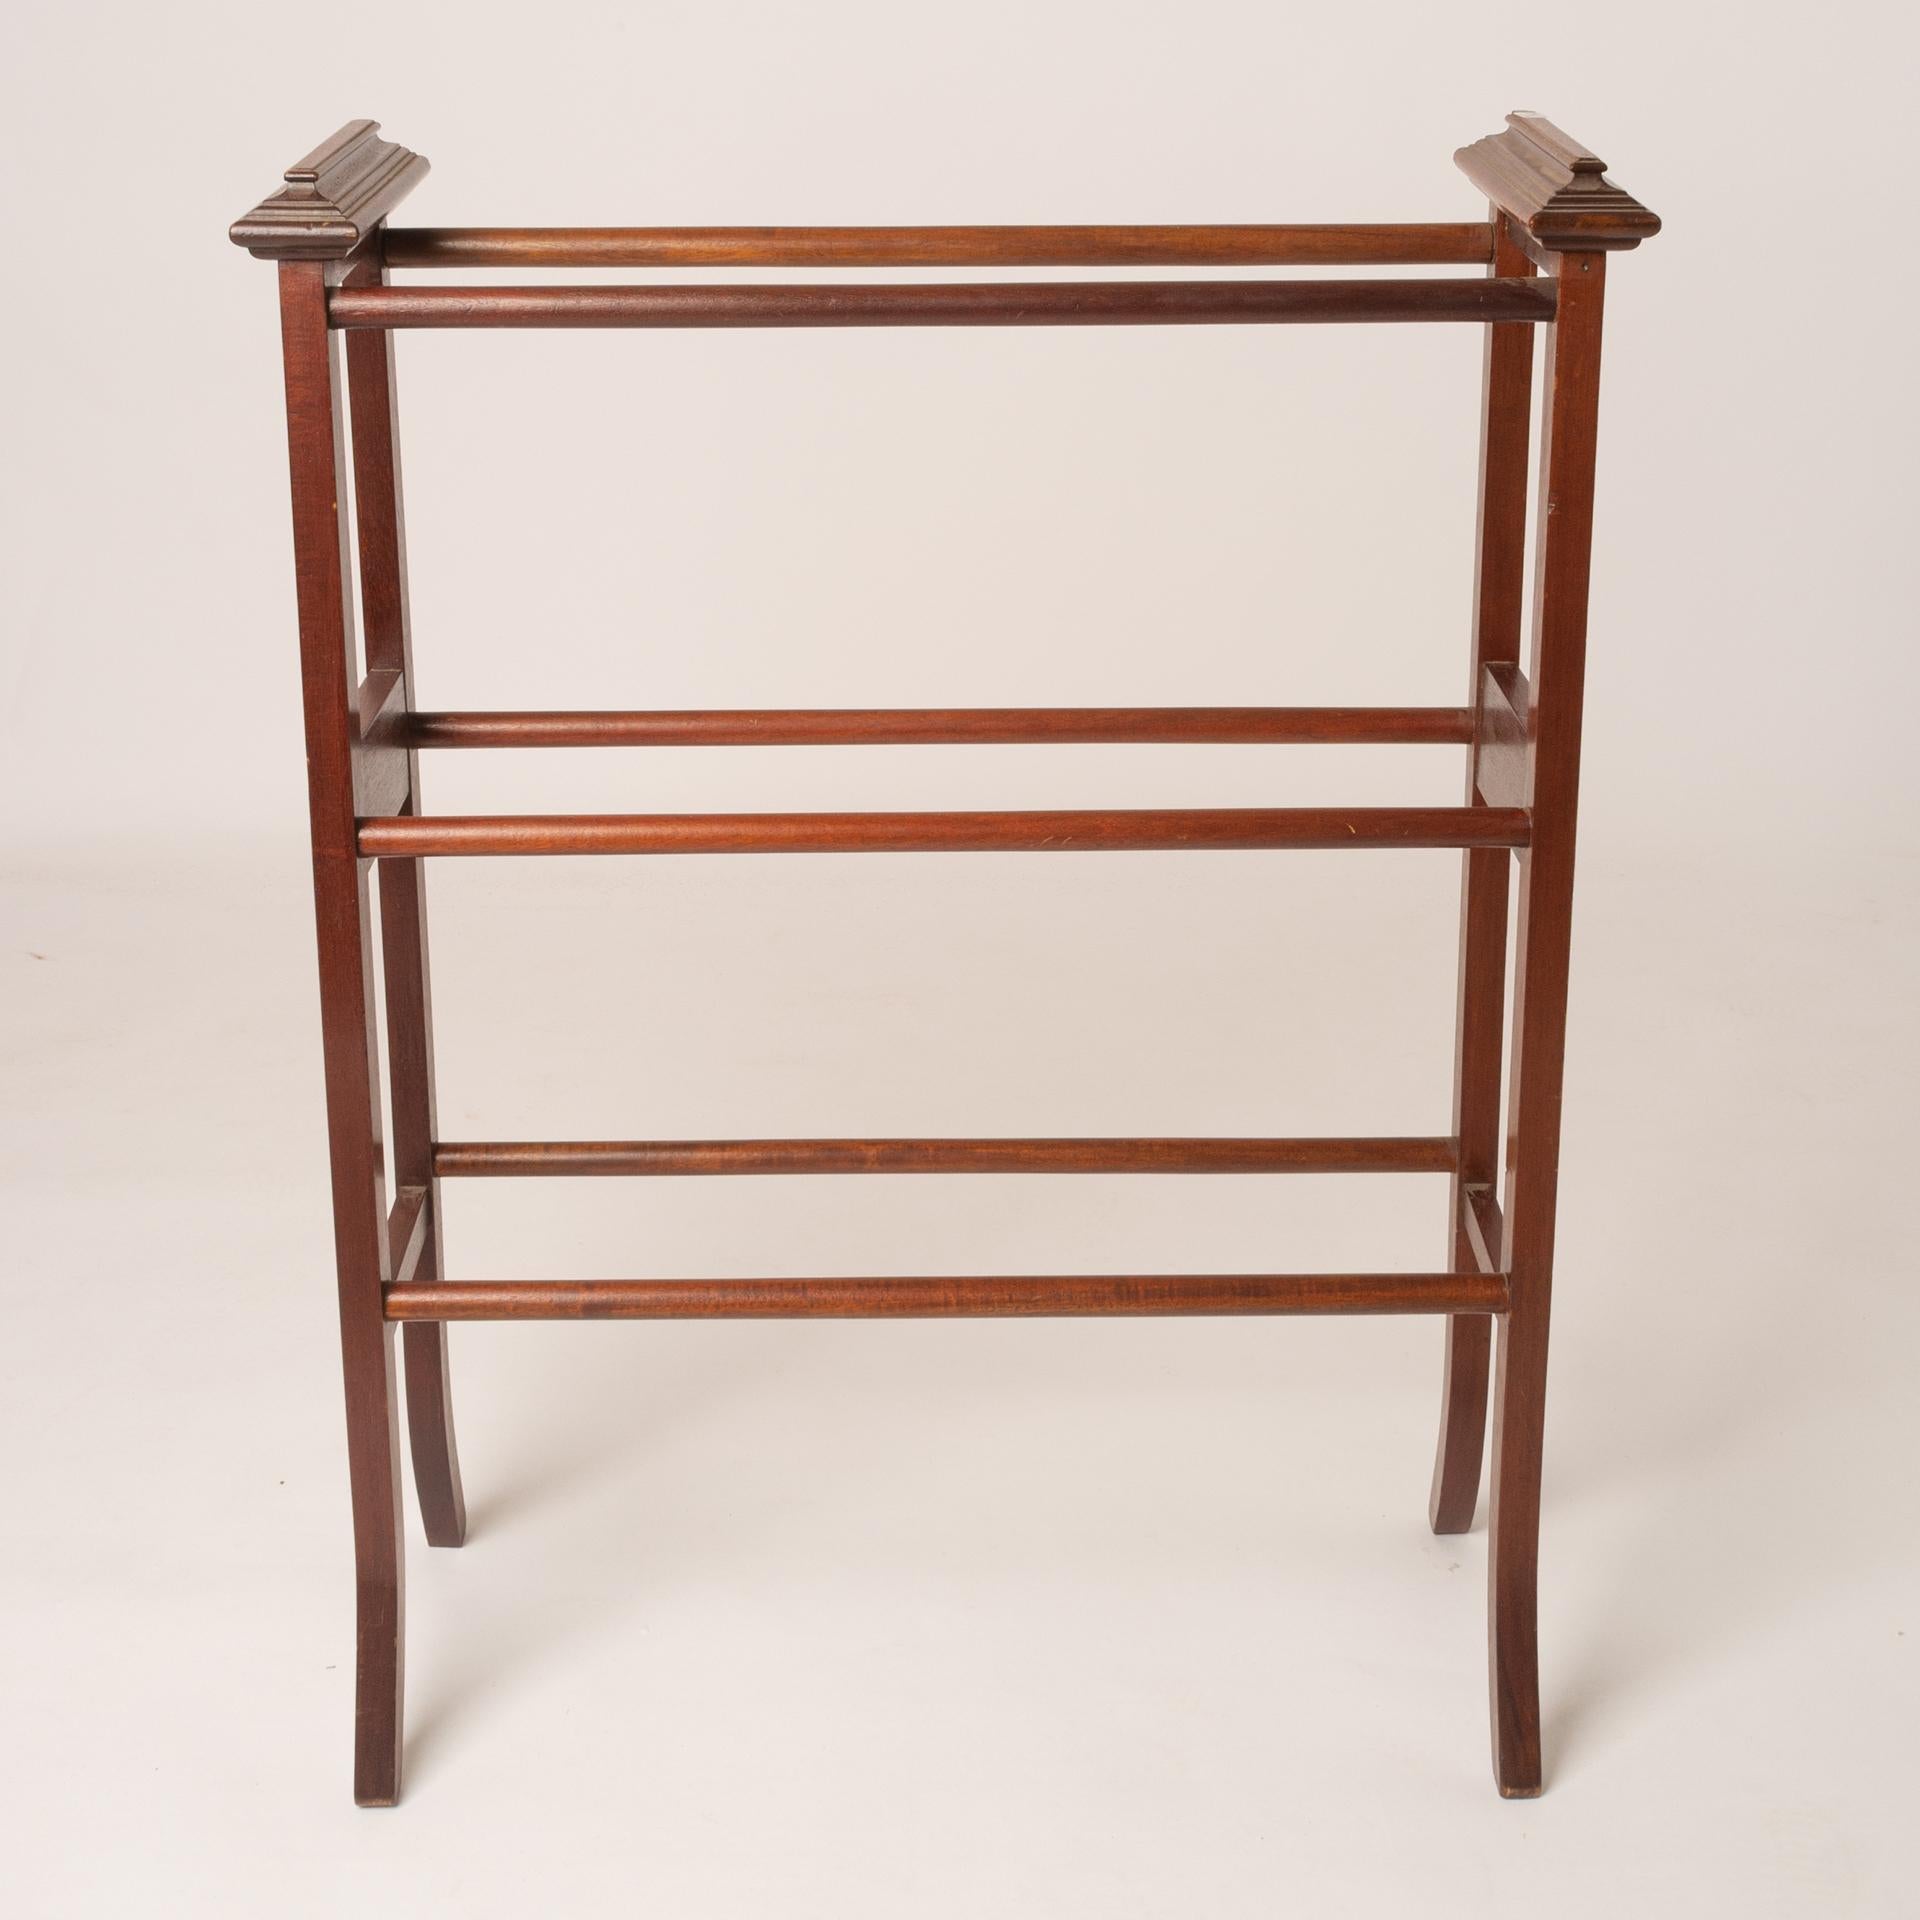 M/714 -  That's an old Emglish towel holder rack: very useful and elegant, old and perfect, now difficult to find.
With a good price because I'm closing activities.